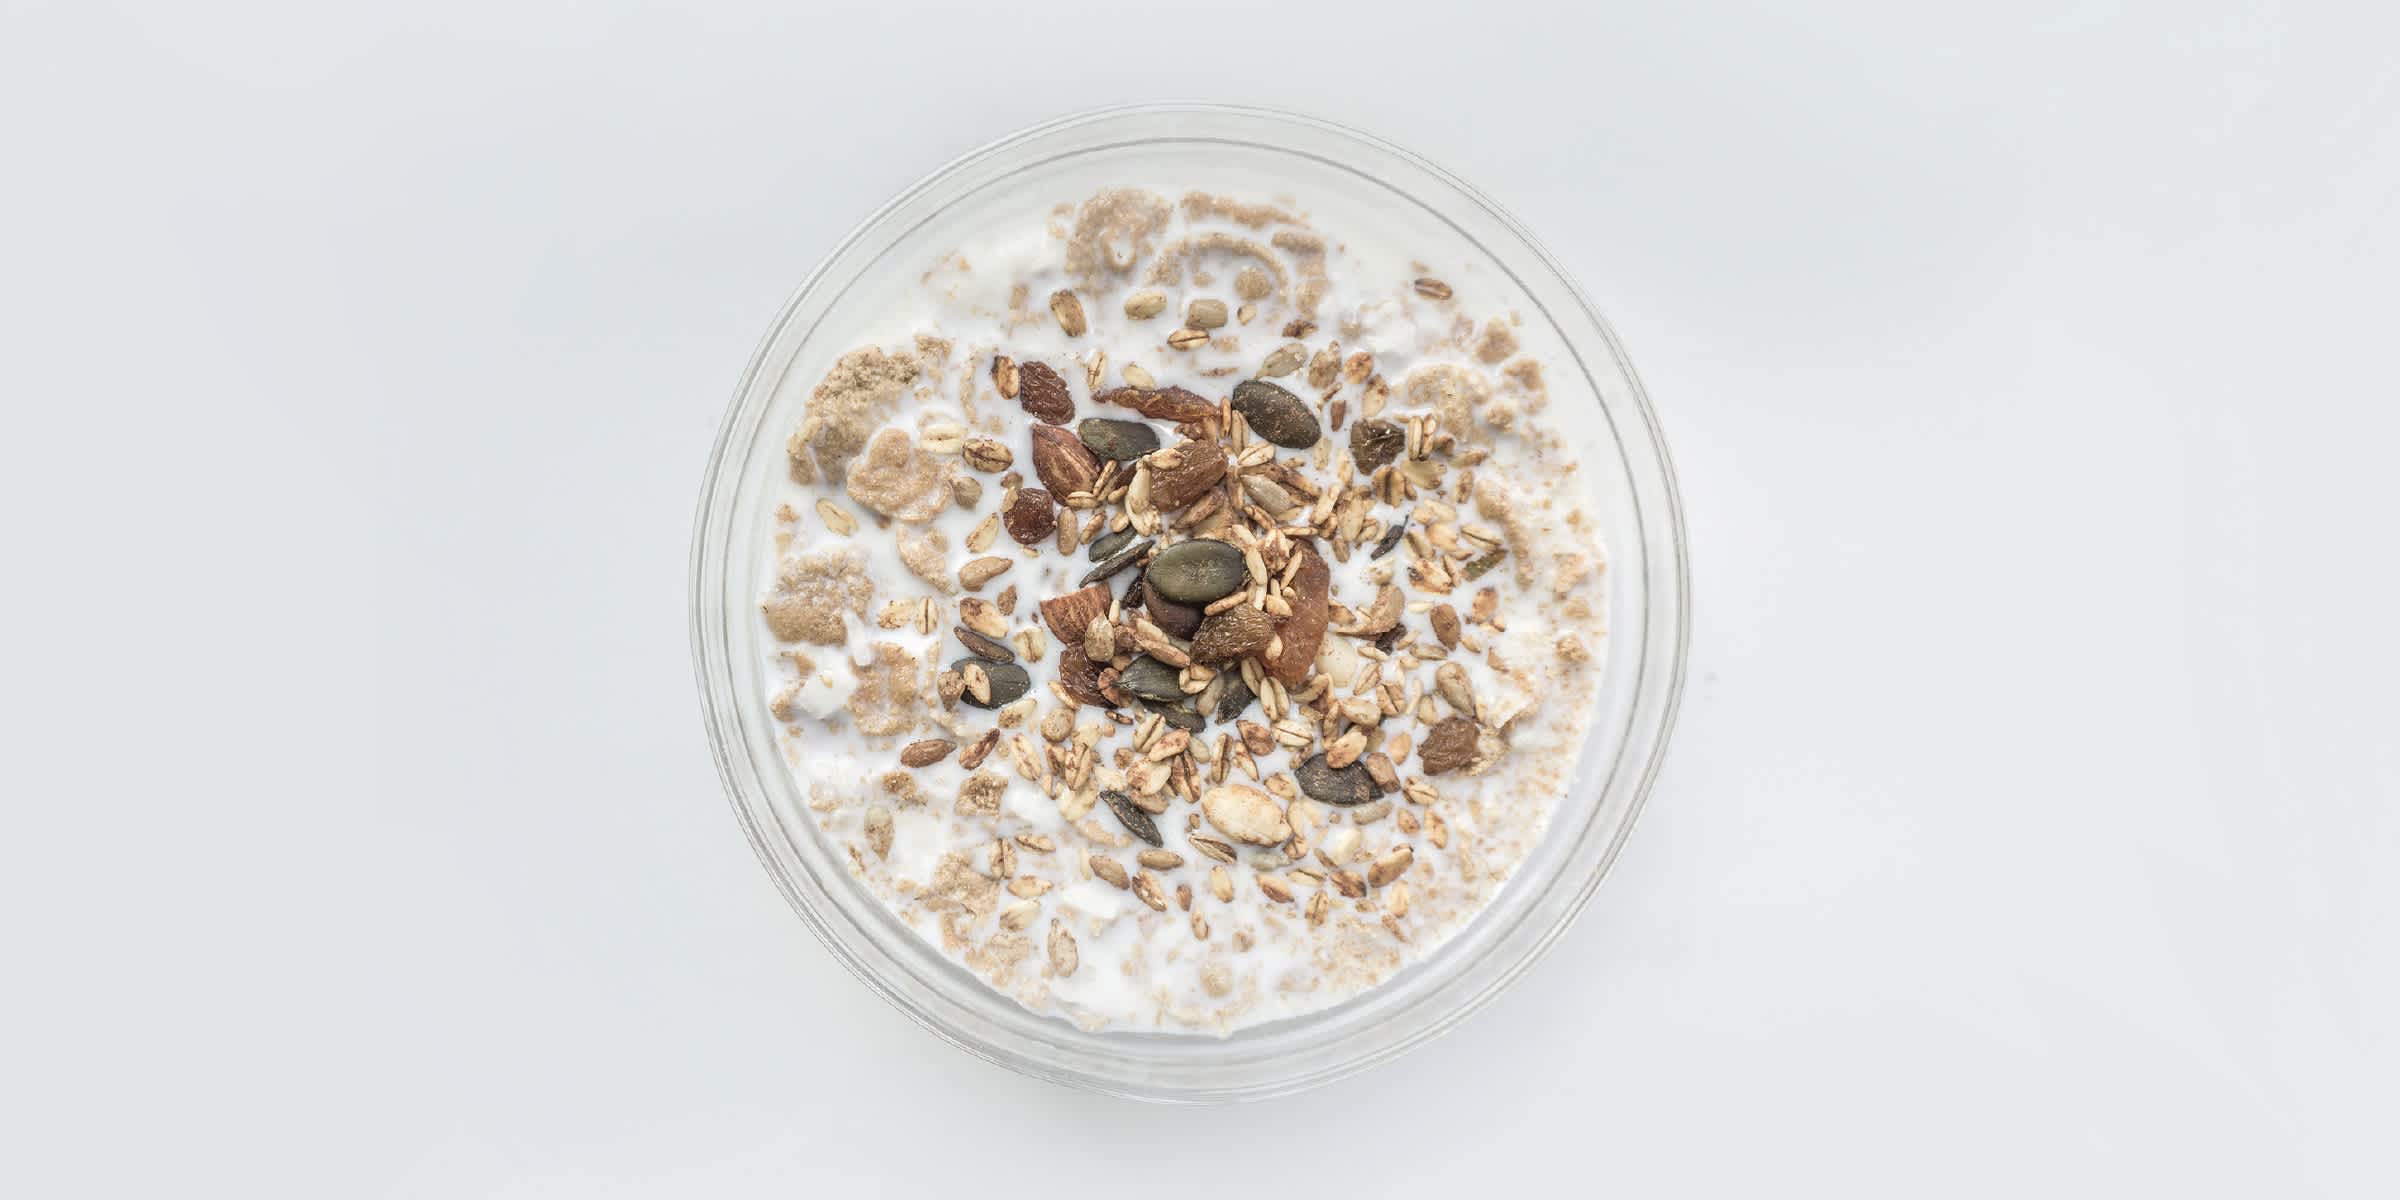 Pumpkin seeds and almonds on top of granola, in a glass of milk. 